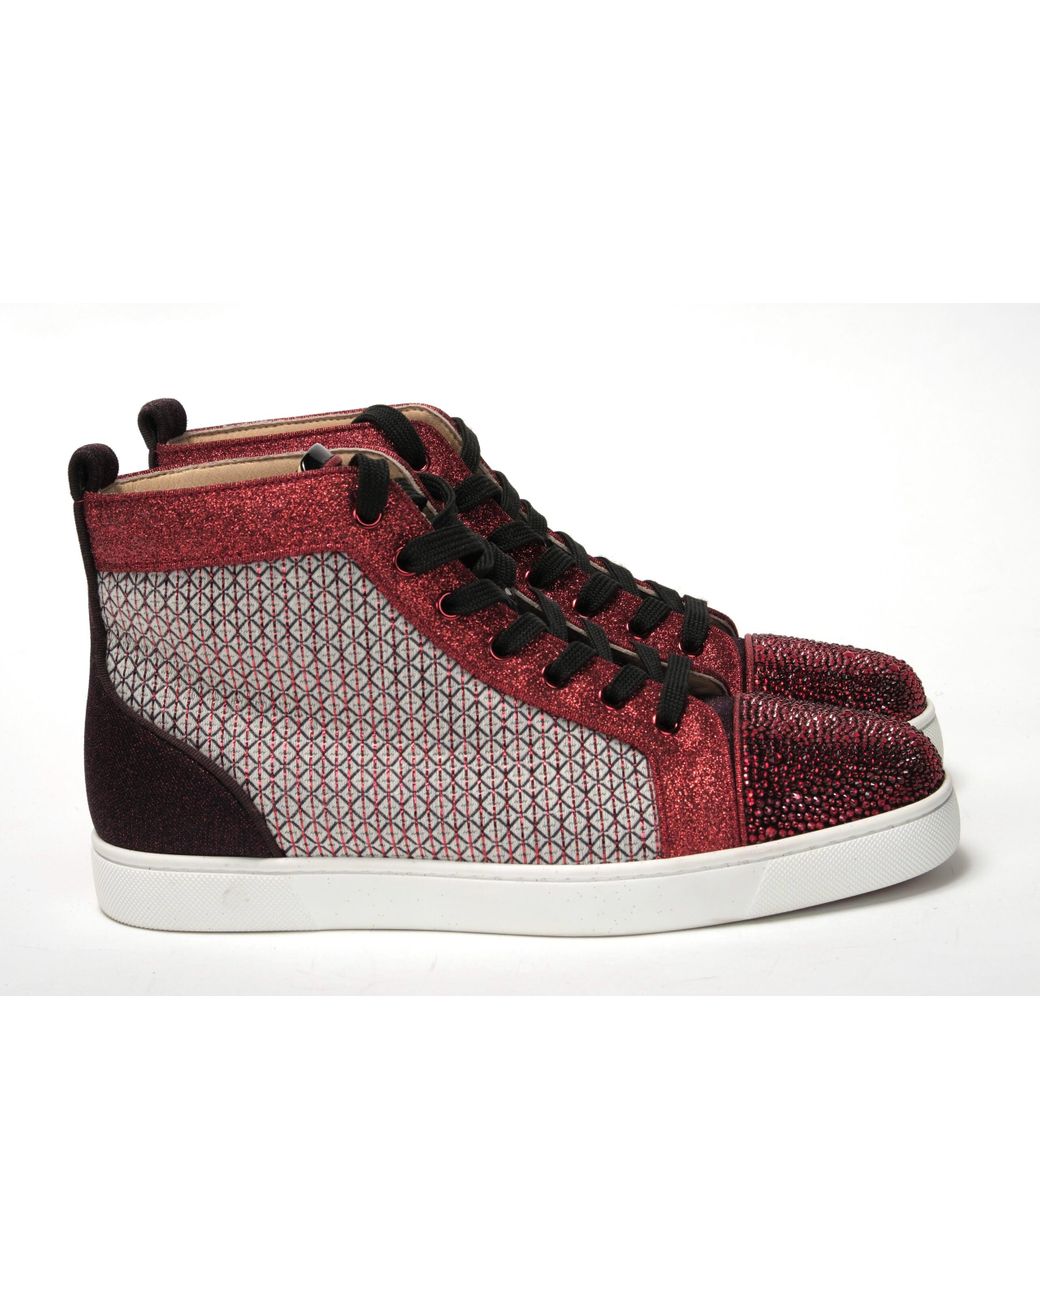 Christian Louboutin Mens Orlato Flat Red High Spikes Sneaker Shoes 40 7  $1300